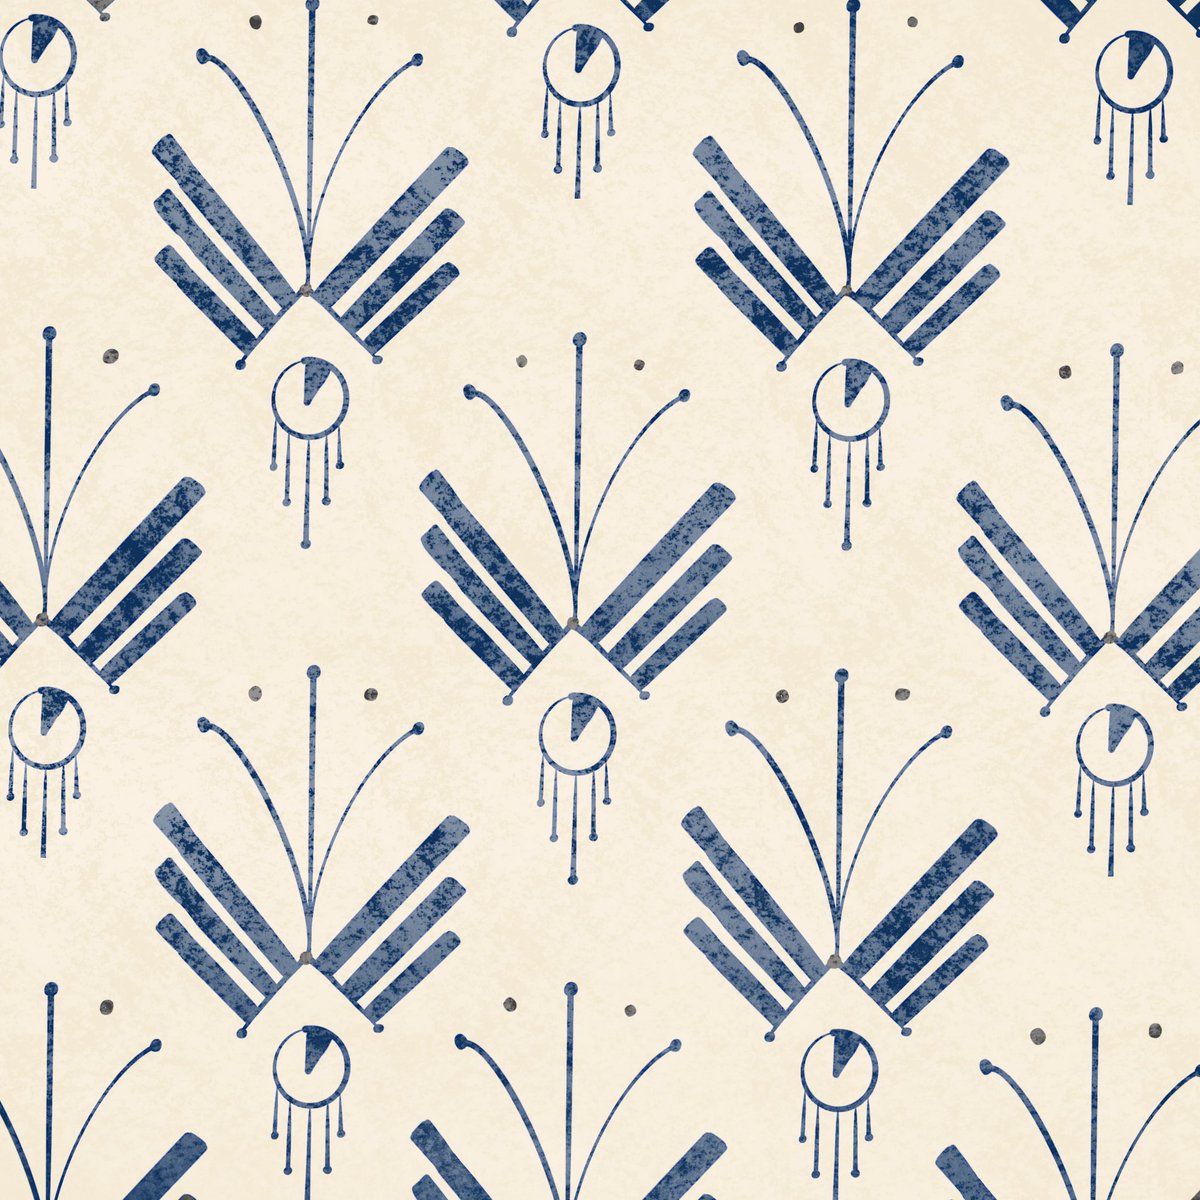  #The100DayProjectI’m imagining what a  #dataviz designer’s wallpaper would look like throughout the past century. Here’s my  #DataVizWallpaper for 1920!